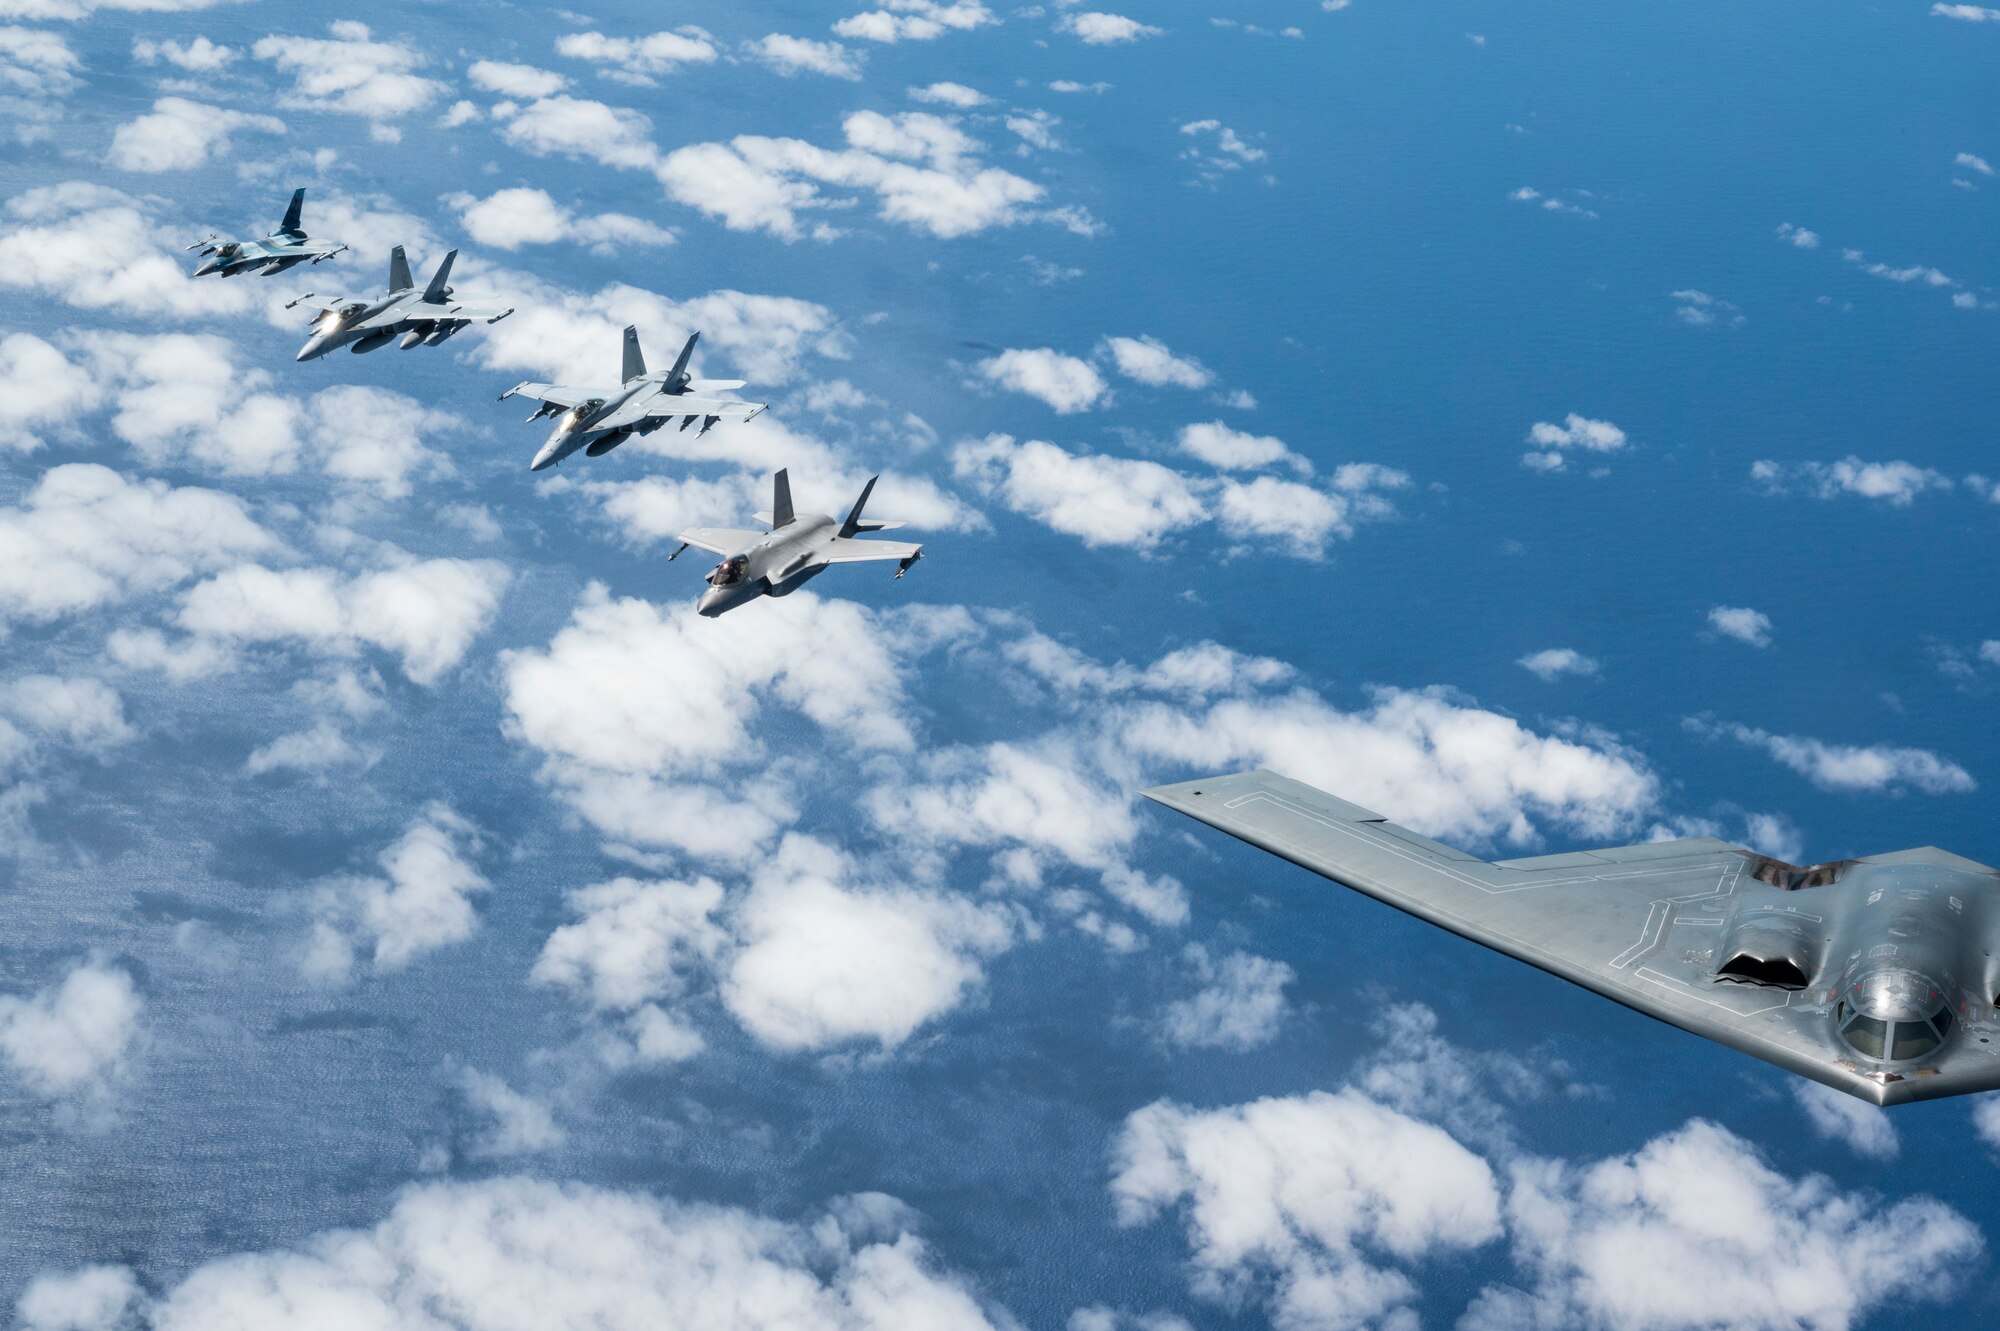 A U.S. Air force B-2 Spirit from Whiteman Air Force Base, Missouri, flies in formation with a Royal Australian Air Force F-35A Lightning IIs, two EA-18 Growlers, two RAAF F/A-18F Super Hornets and two U.S. Air Force F-16C Aggressors from Eielson Air Force Base, Alaska during a training mission in the Indo-Pacific region, March 23, 2022. The U.S. trains alongside allies and partners to demonstrate interoperability and bolster collective ability to support a free and open Indo-Pacific and this most recent mission was no exception. (U.S. Air Force photo by Tech. Sgt. Hailey Haux)